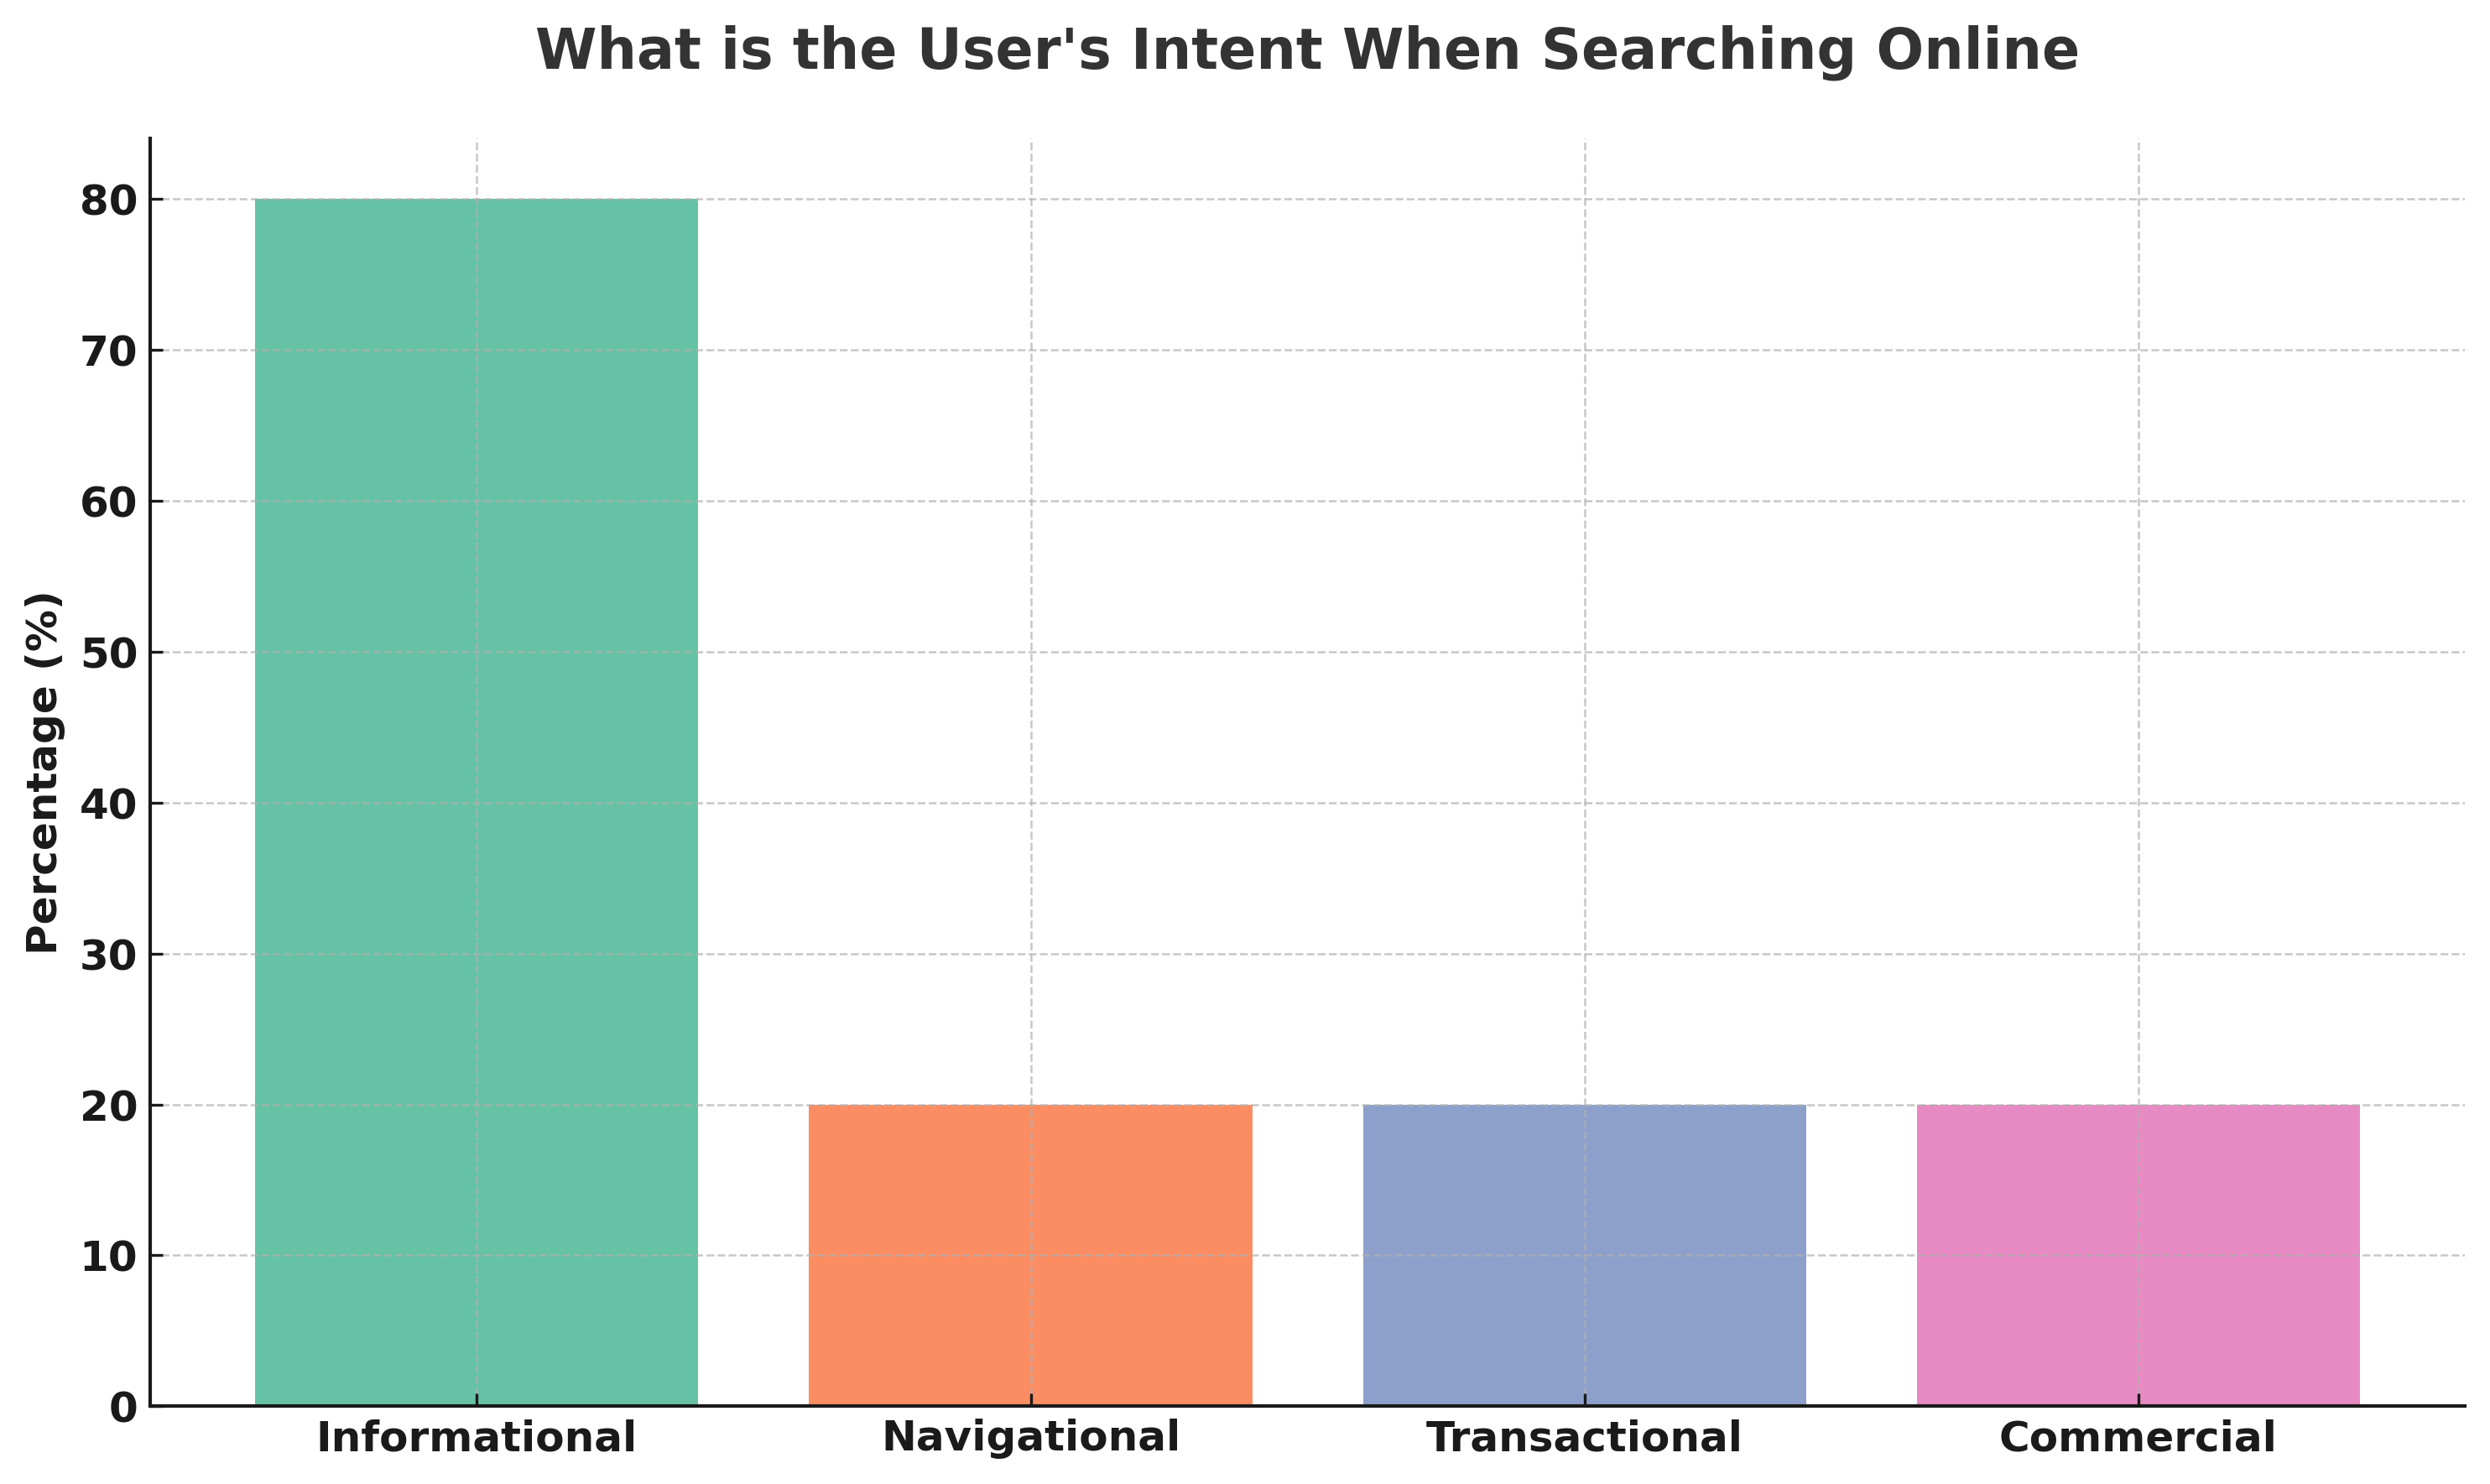 What is the user's intent when searching online